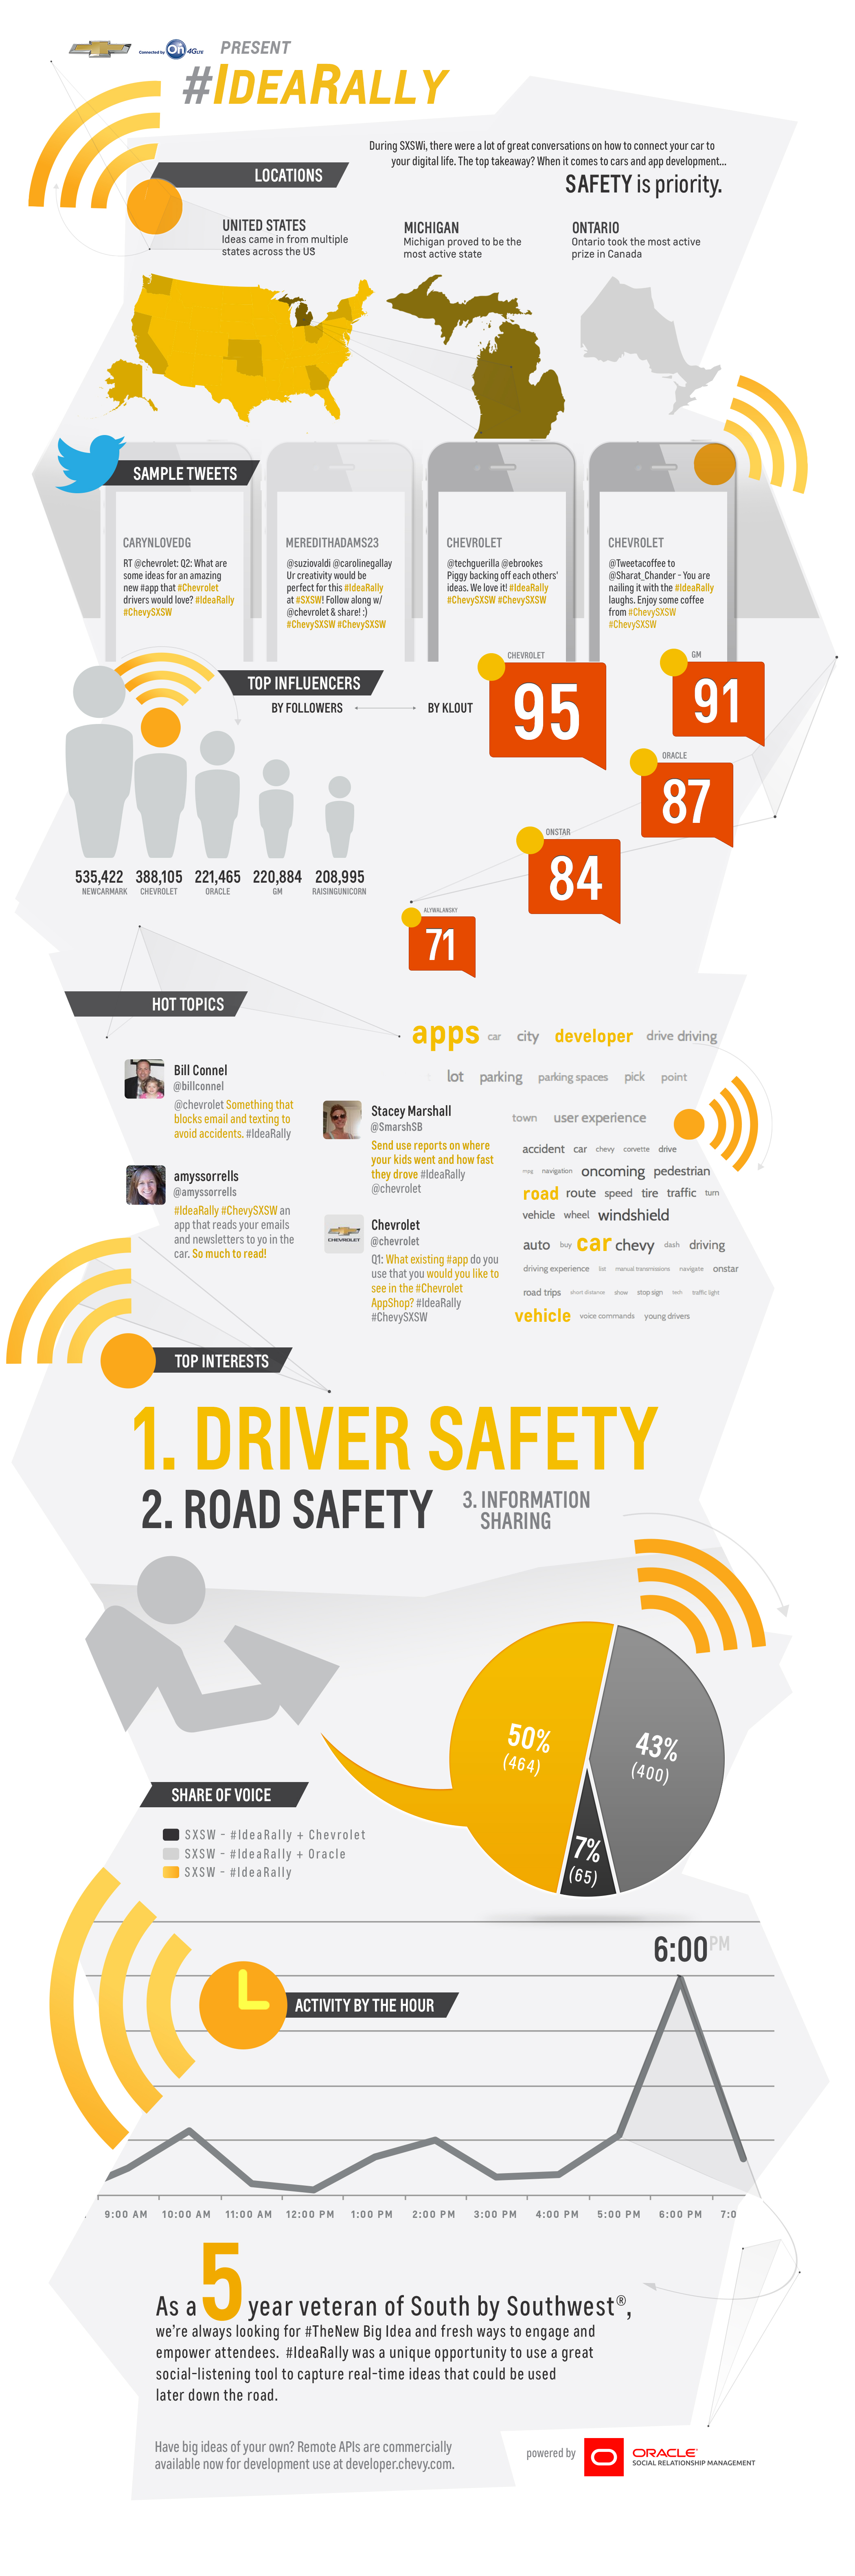 Chevrolet IdeaRally_InfoGraphic_Final